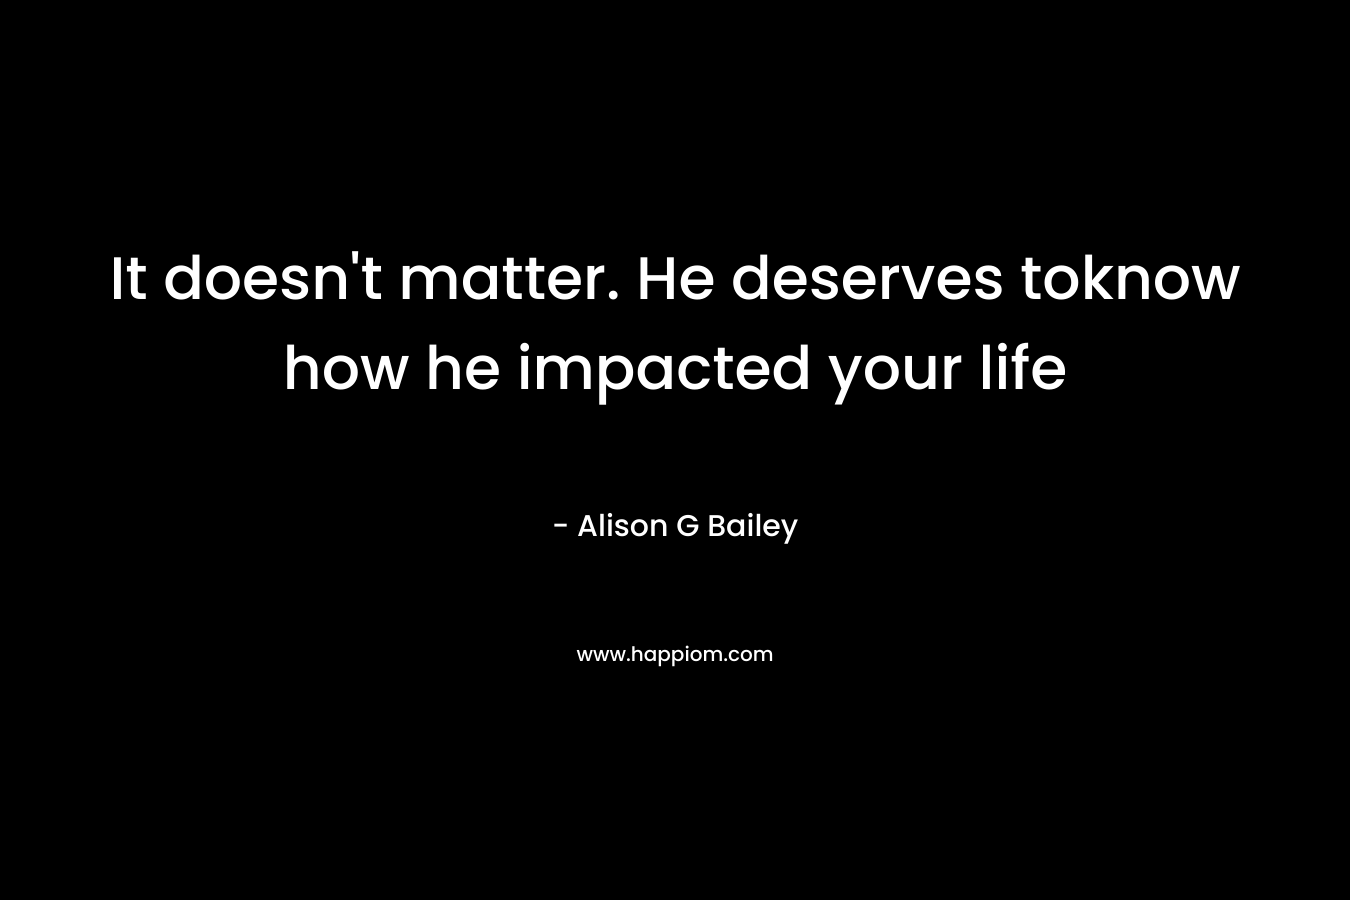 It doesn't matter. He deserves toknow how he impacted your life